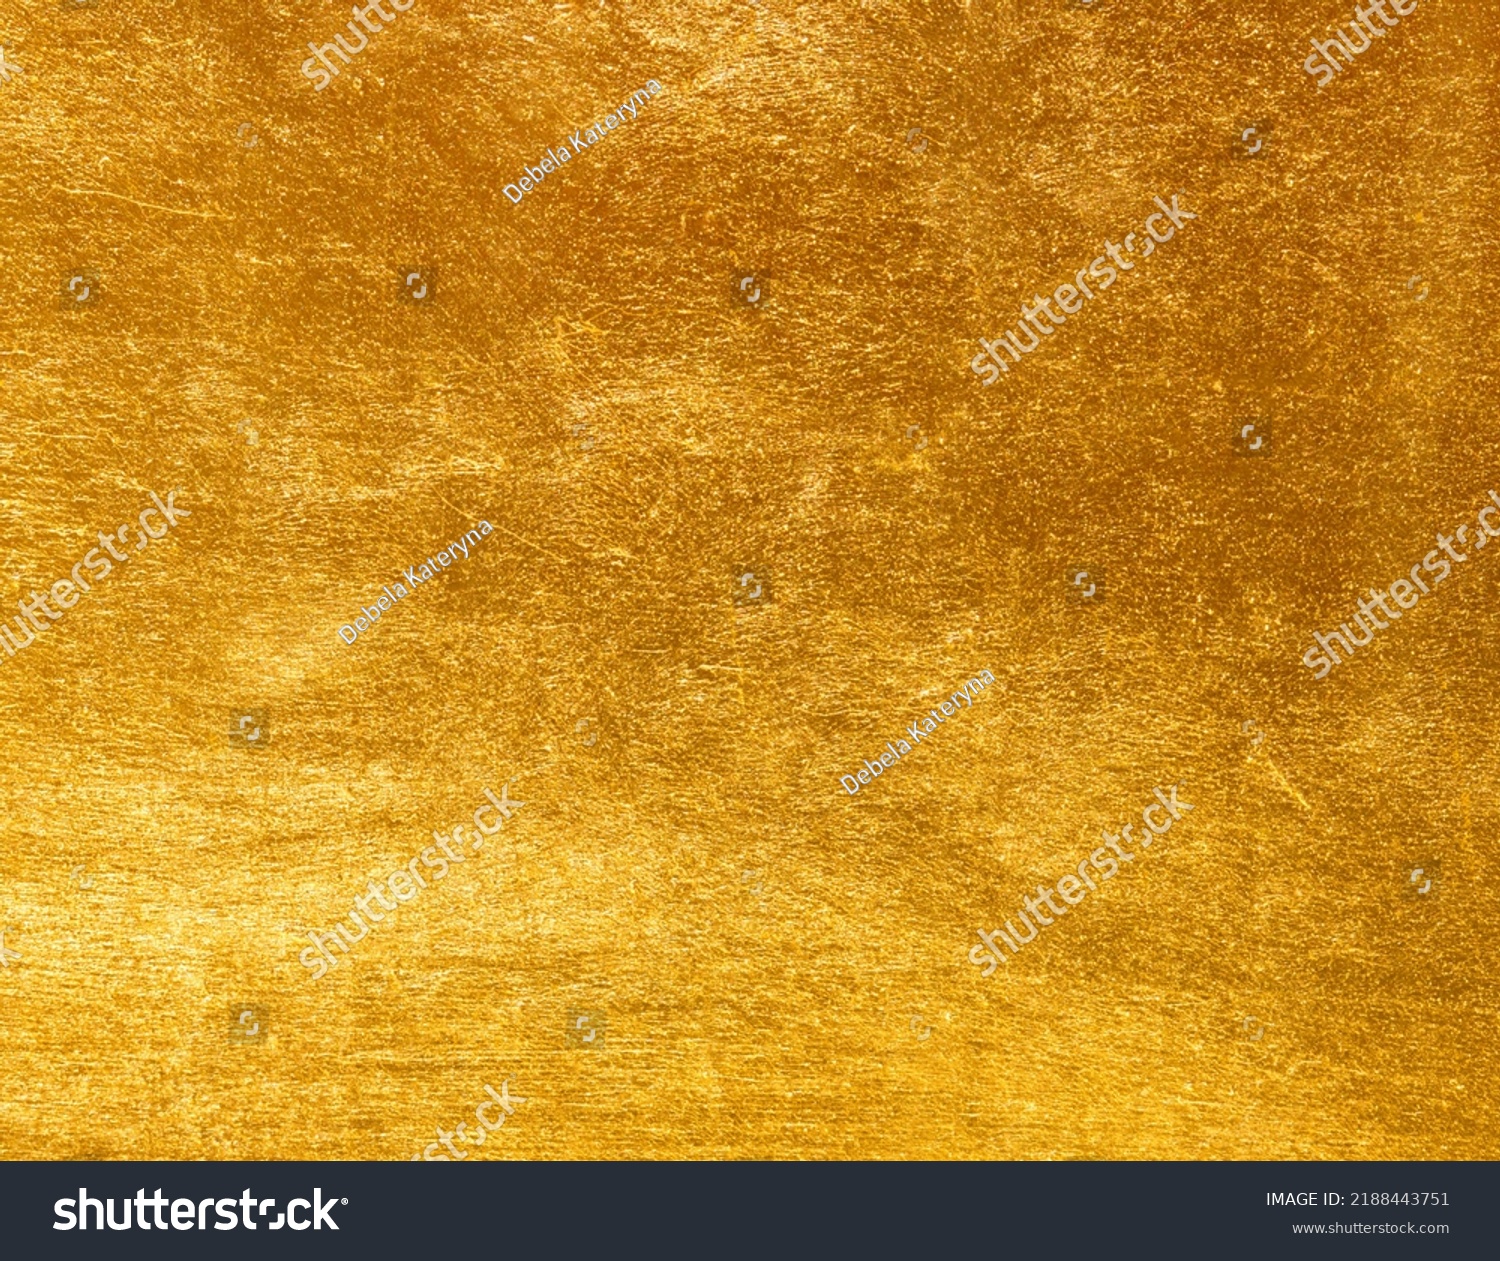 Gold Texture Wall Gold Background Texture Stock Photo 2188443751 ...